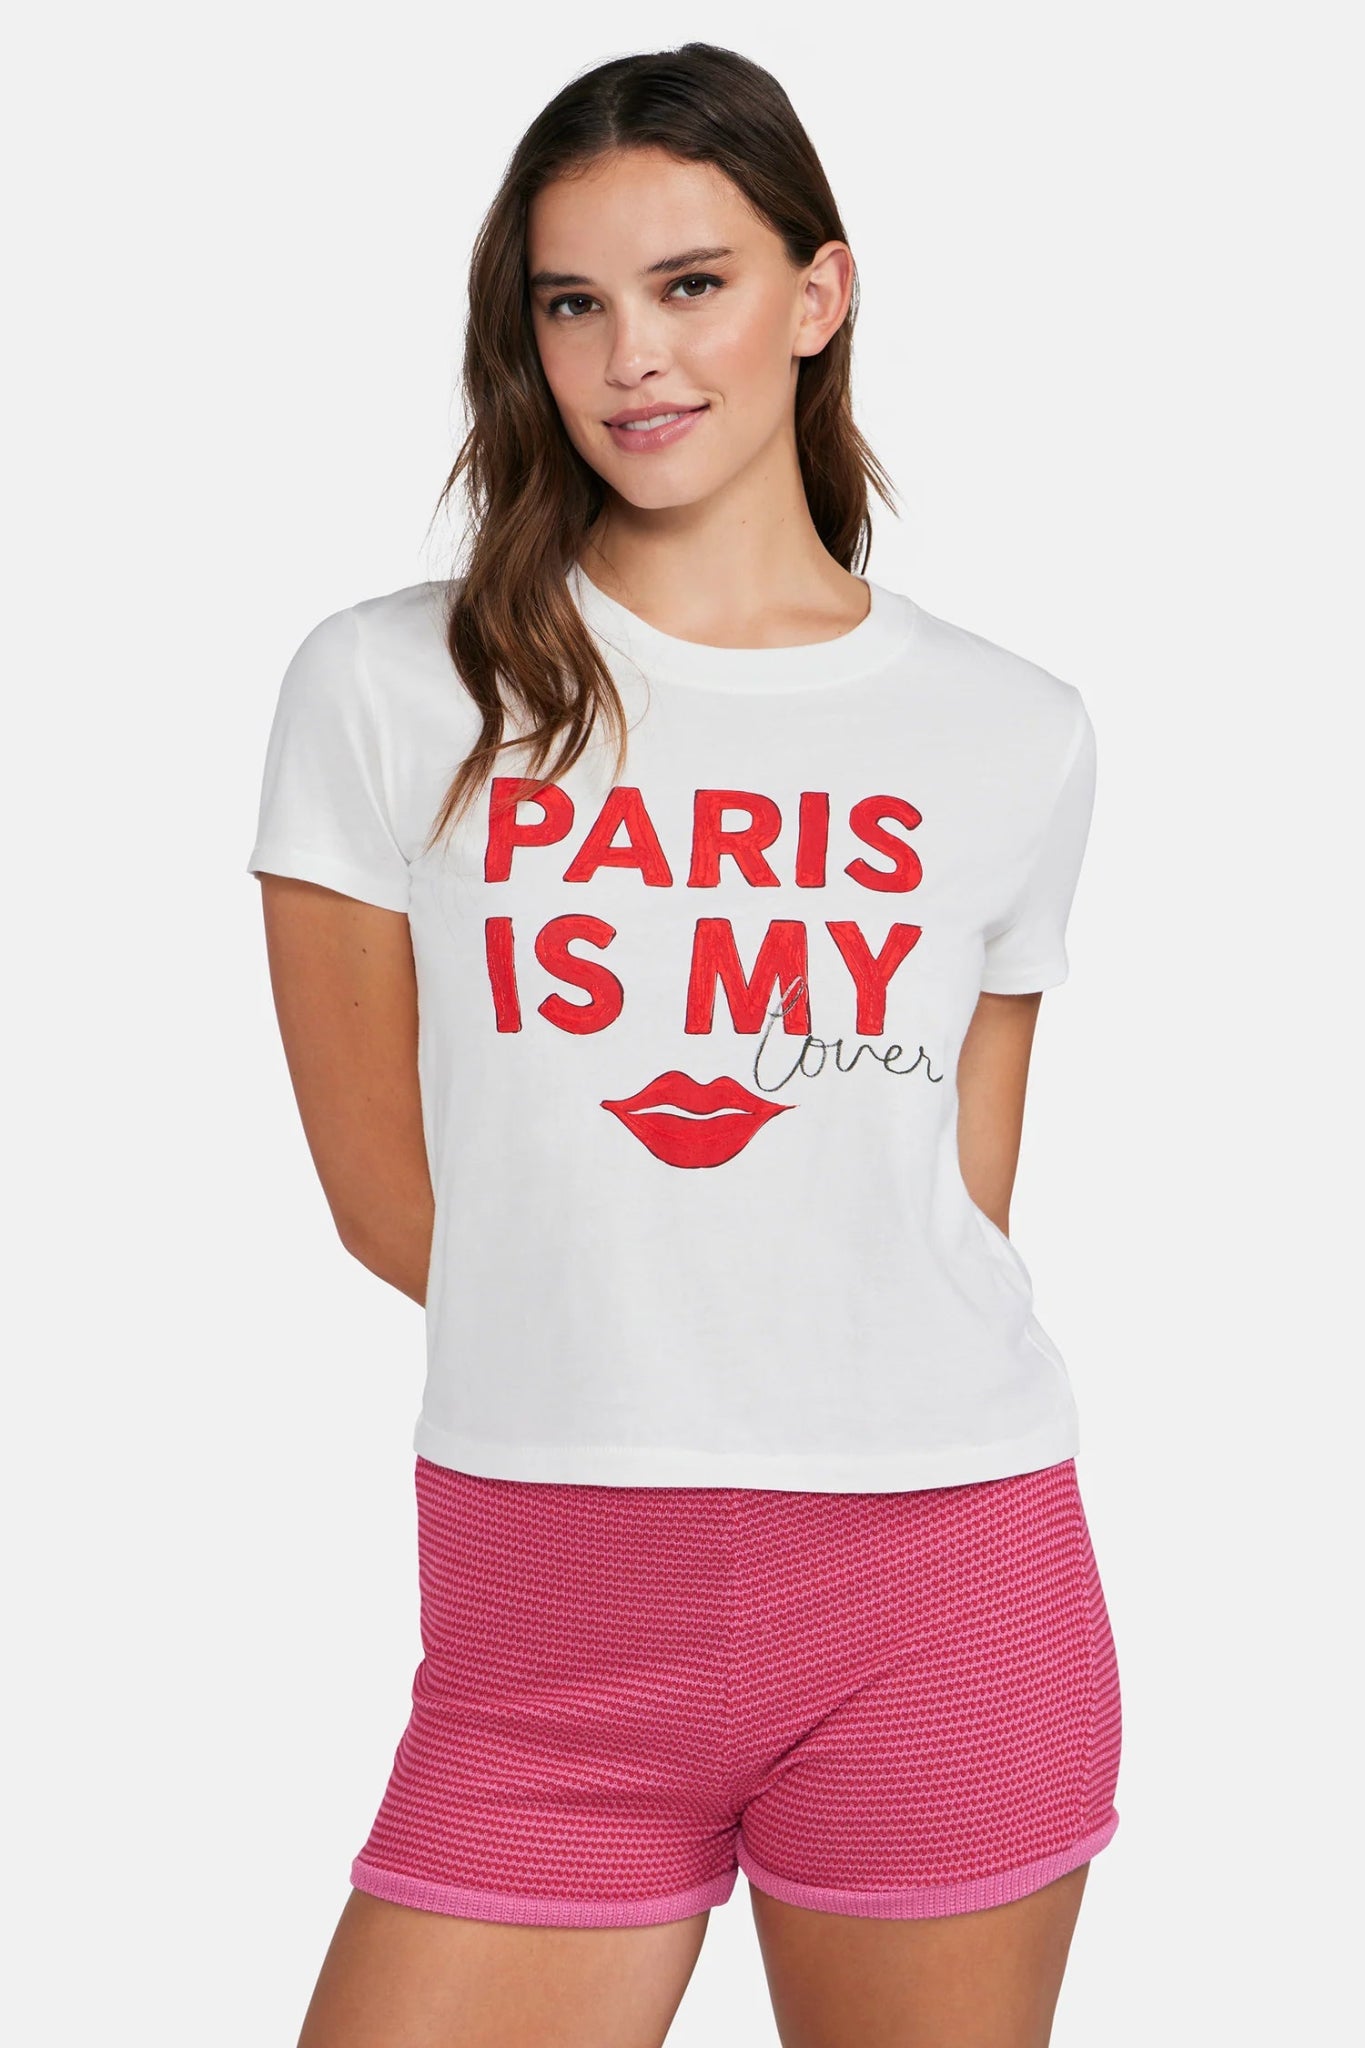 Shop Wildfox Paris Is My Lover Tee - Premium T-Shirt from Wildfox Online now at Spoiled Brat 